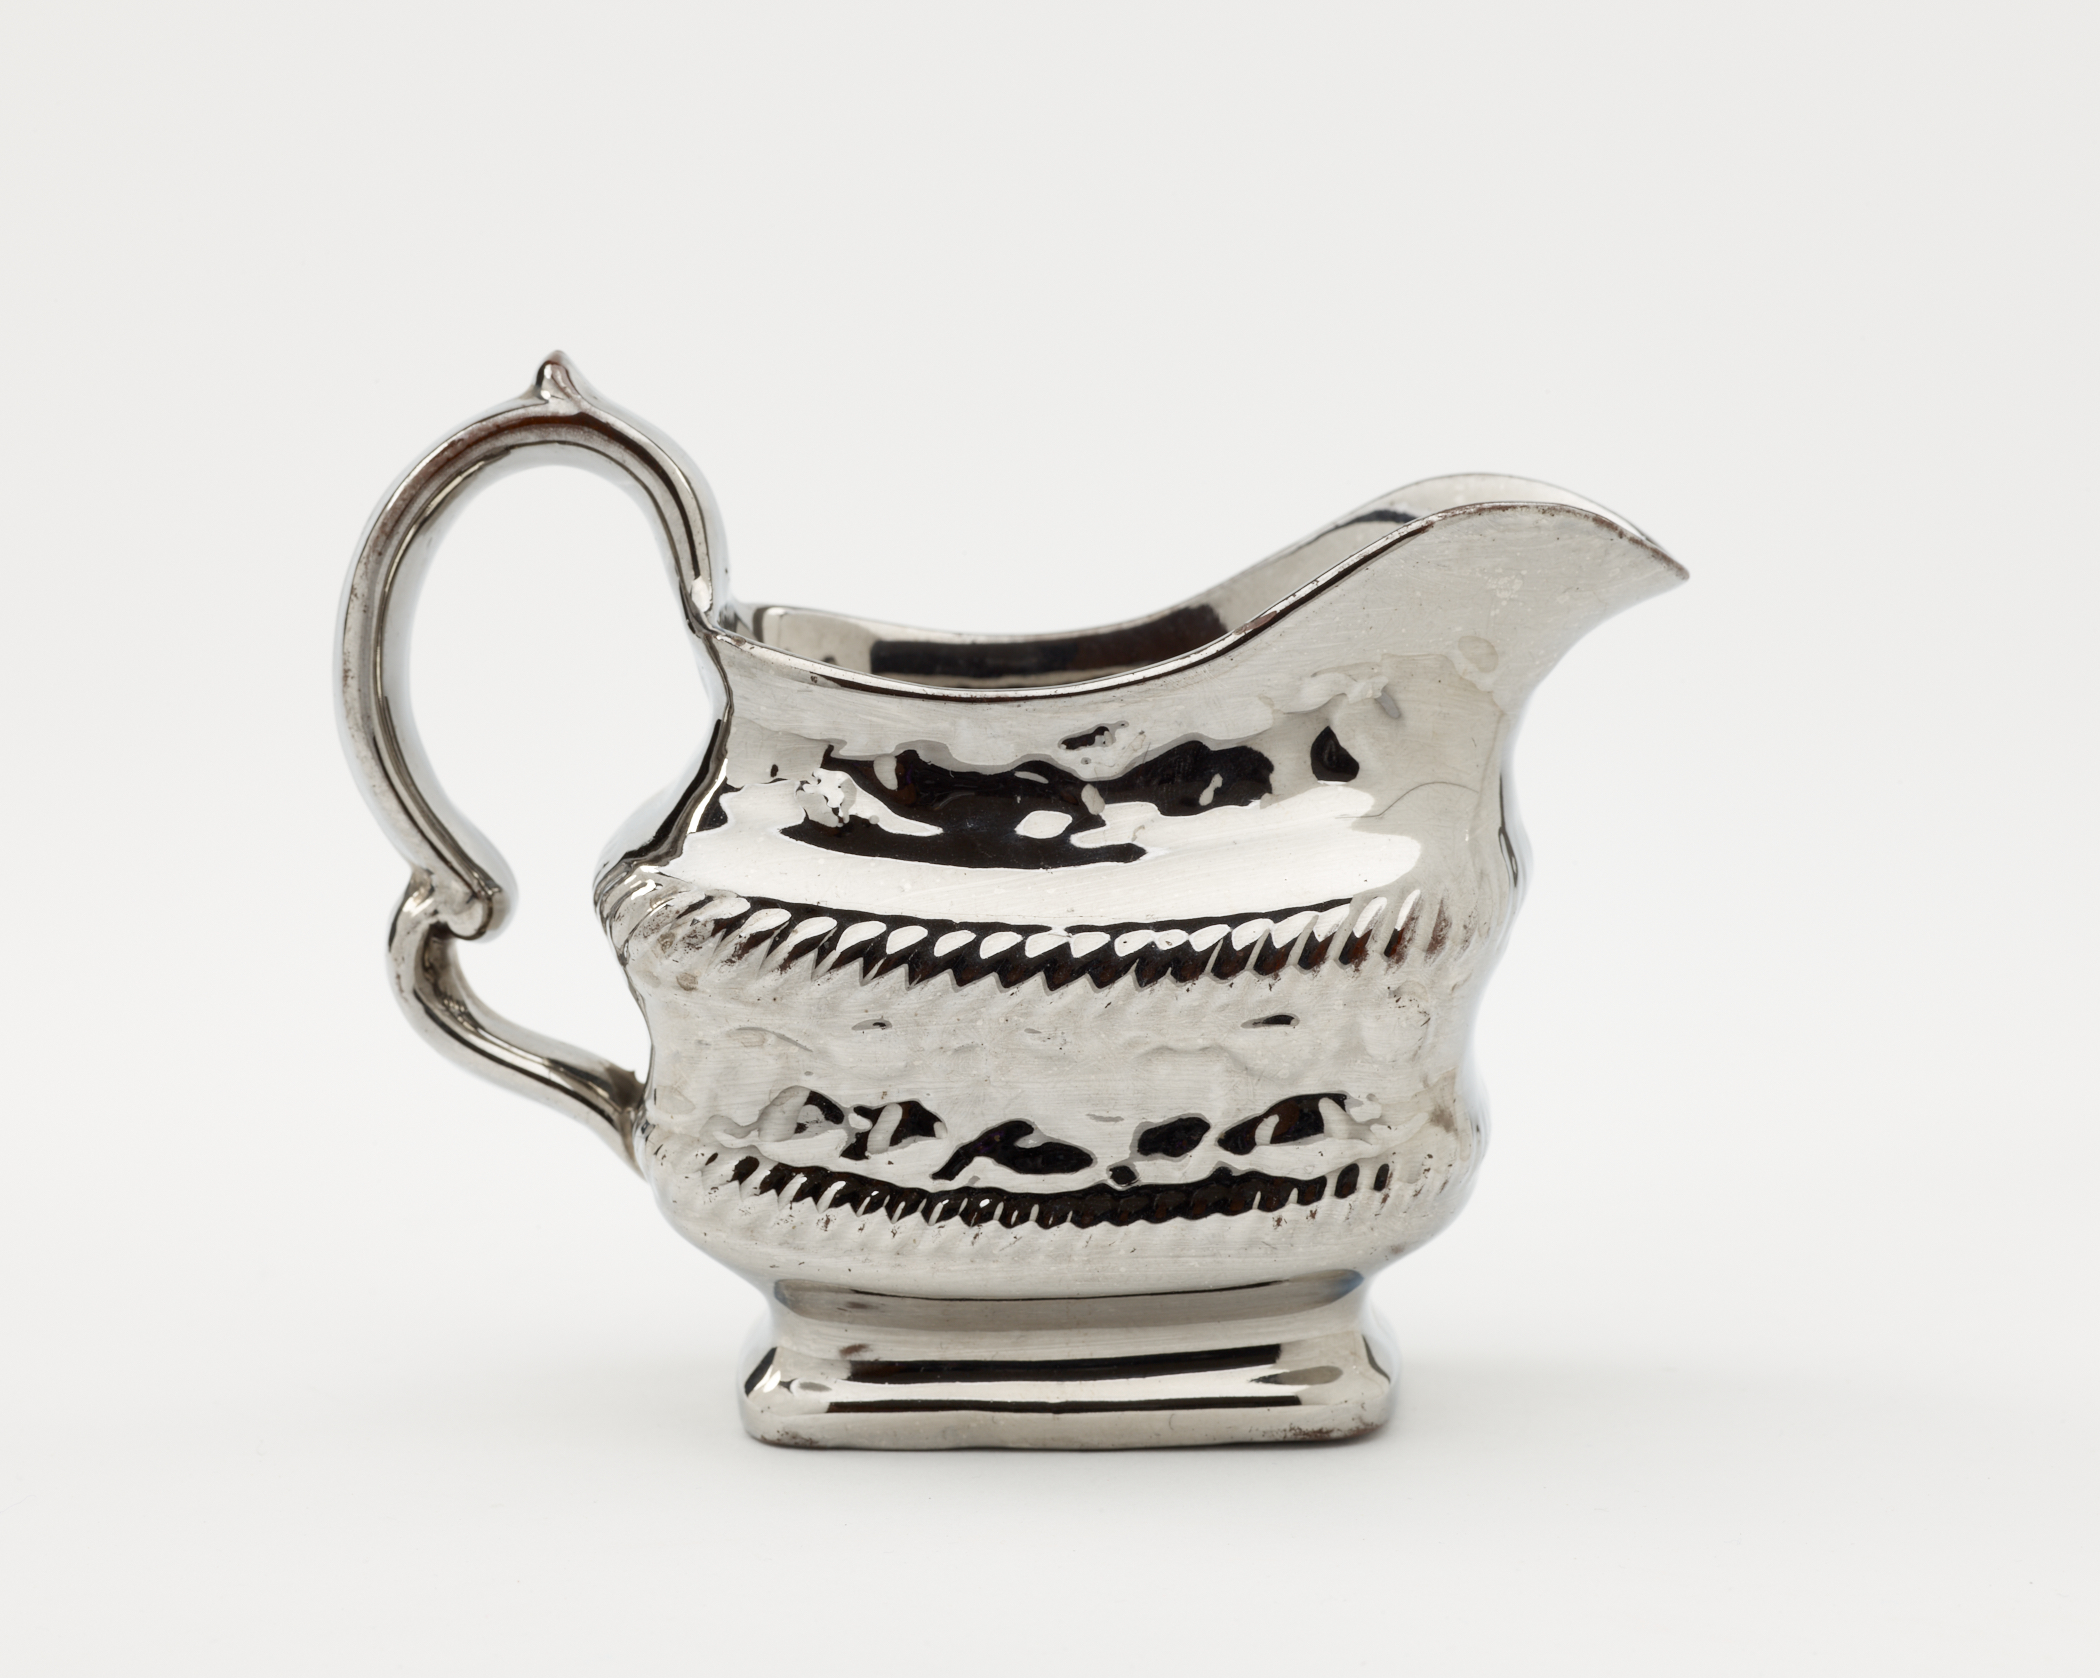 /A%20silver%20luster%20creamer%20with%20a%20decorative%20handle%2C%20a%20rounded%20square%20body%20with%20sculptural%20decorations.